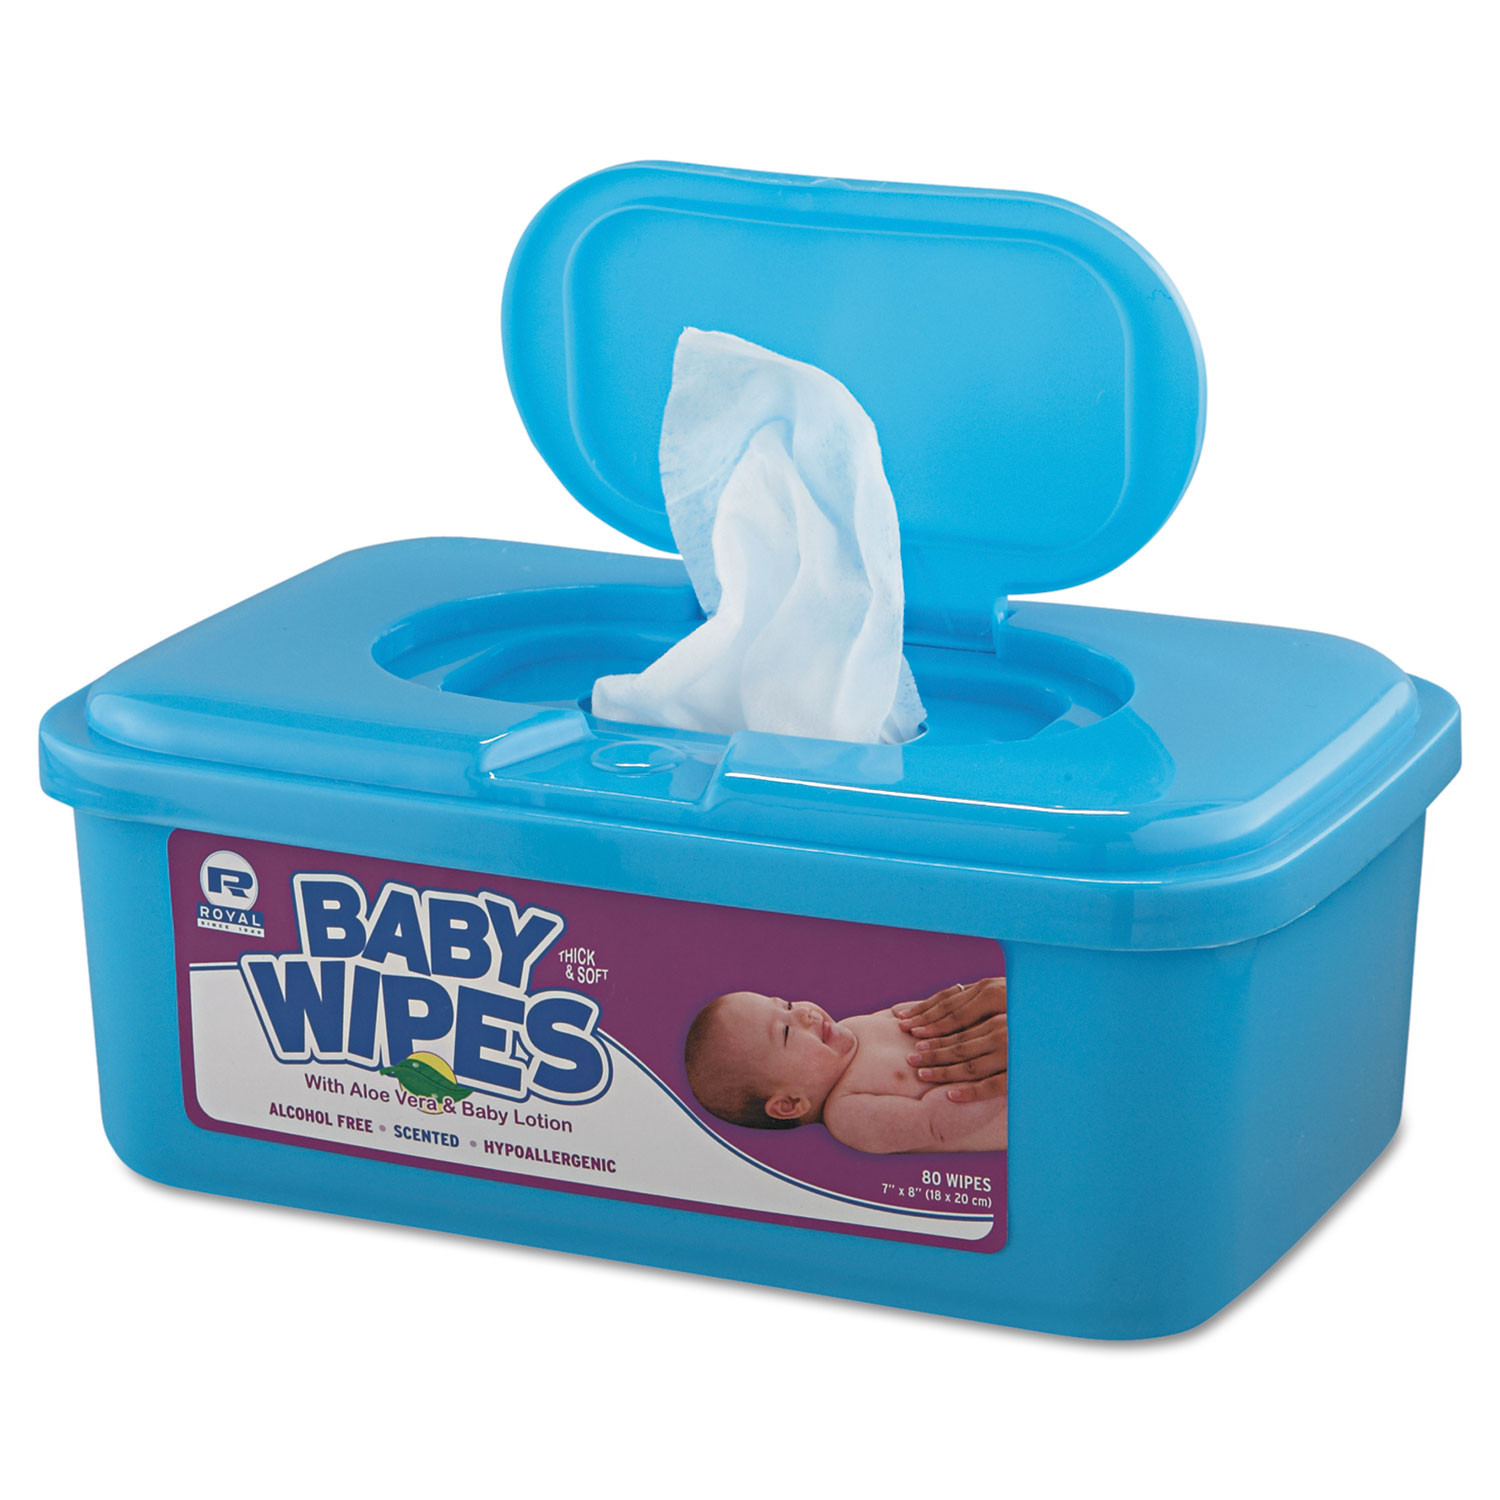 BABY WIPE UNSCENTED REFILL, 12/80 – AmerCareRoyal